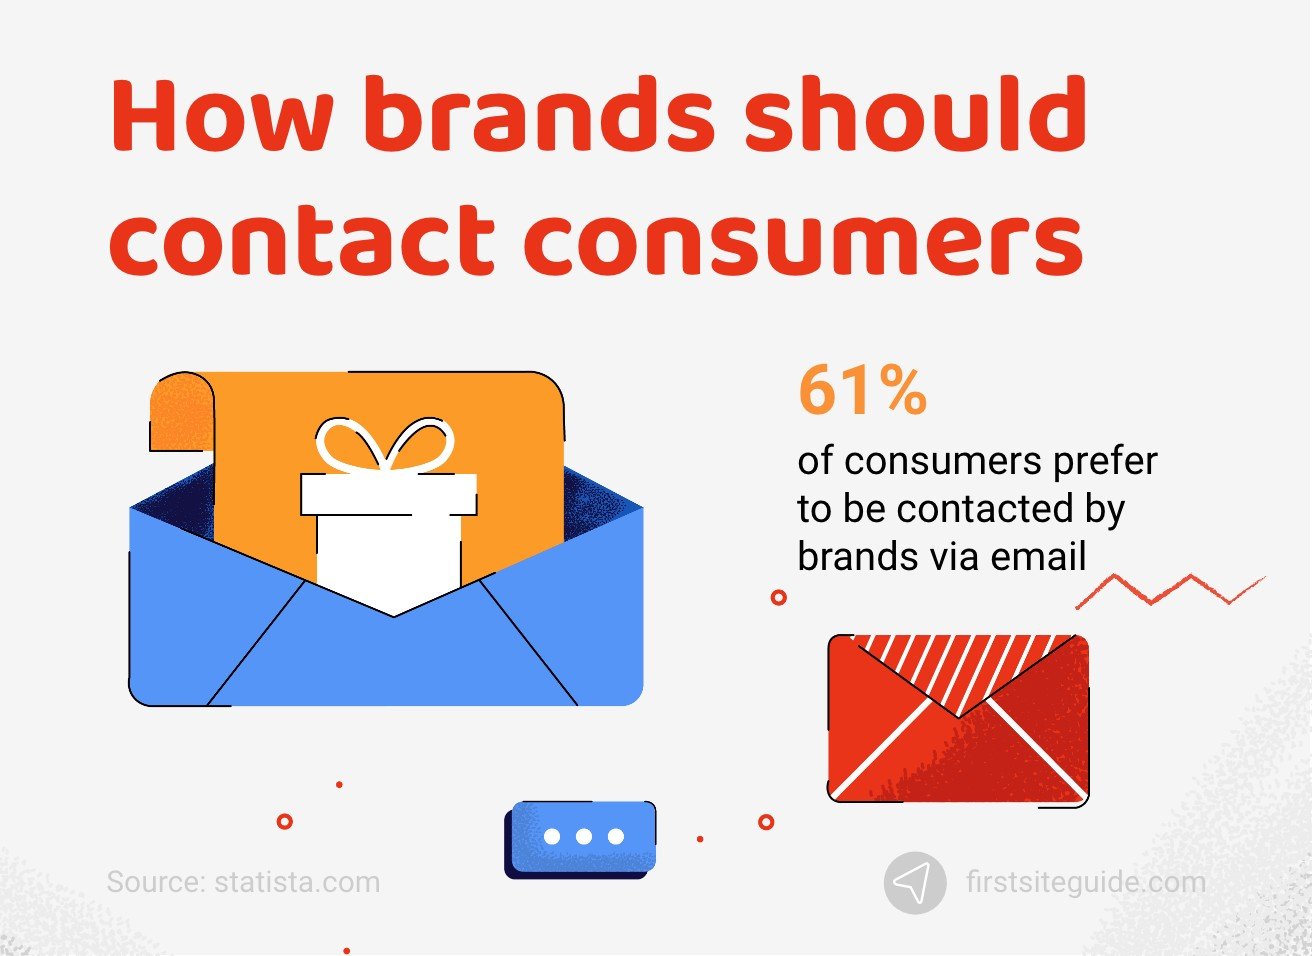 How brands should contact consumers